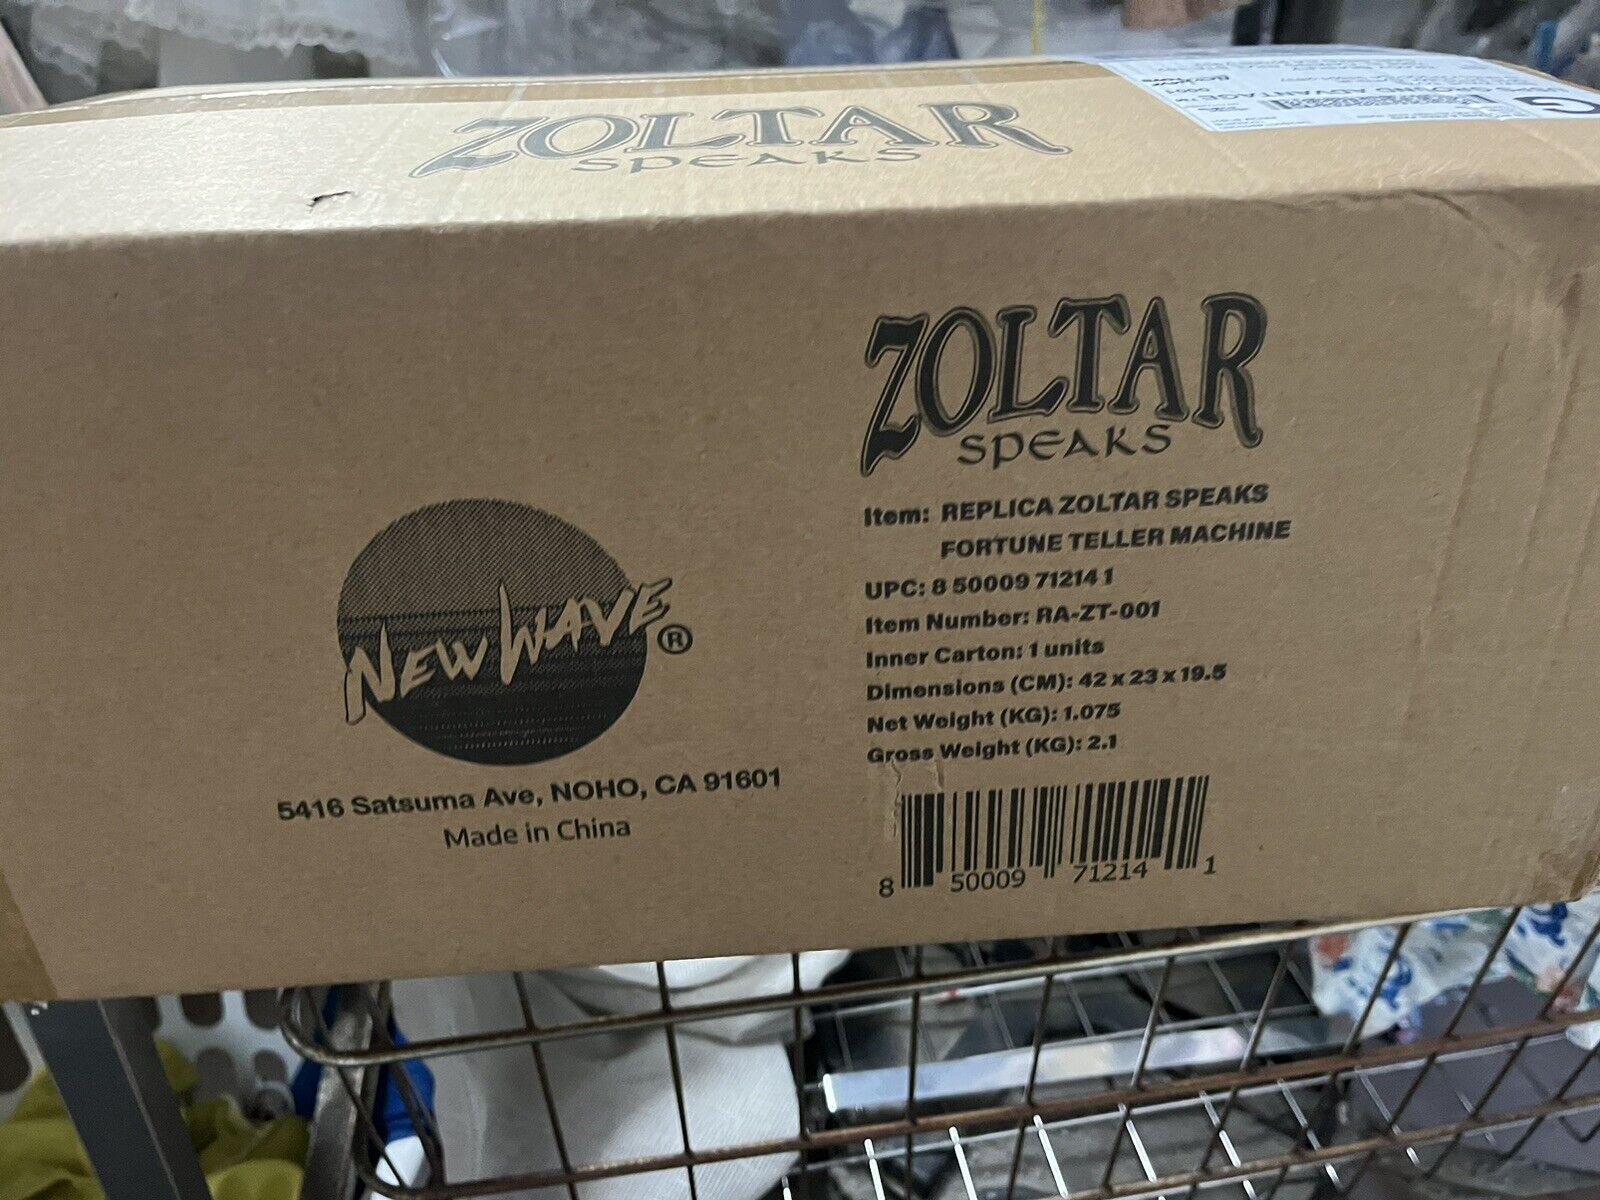 New Wave Toys ZOLTAR SPEAKS by New Wave Toys